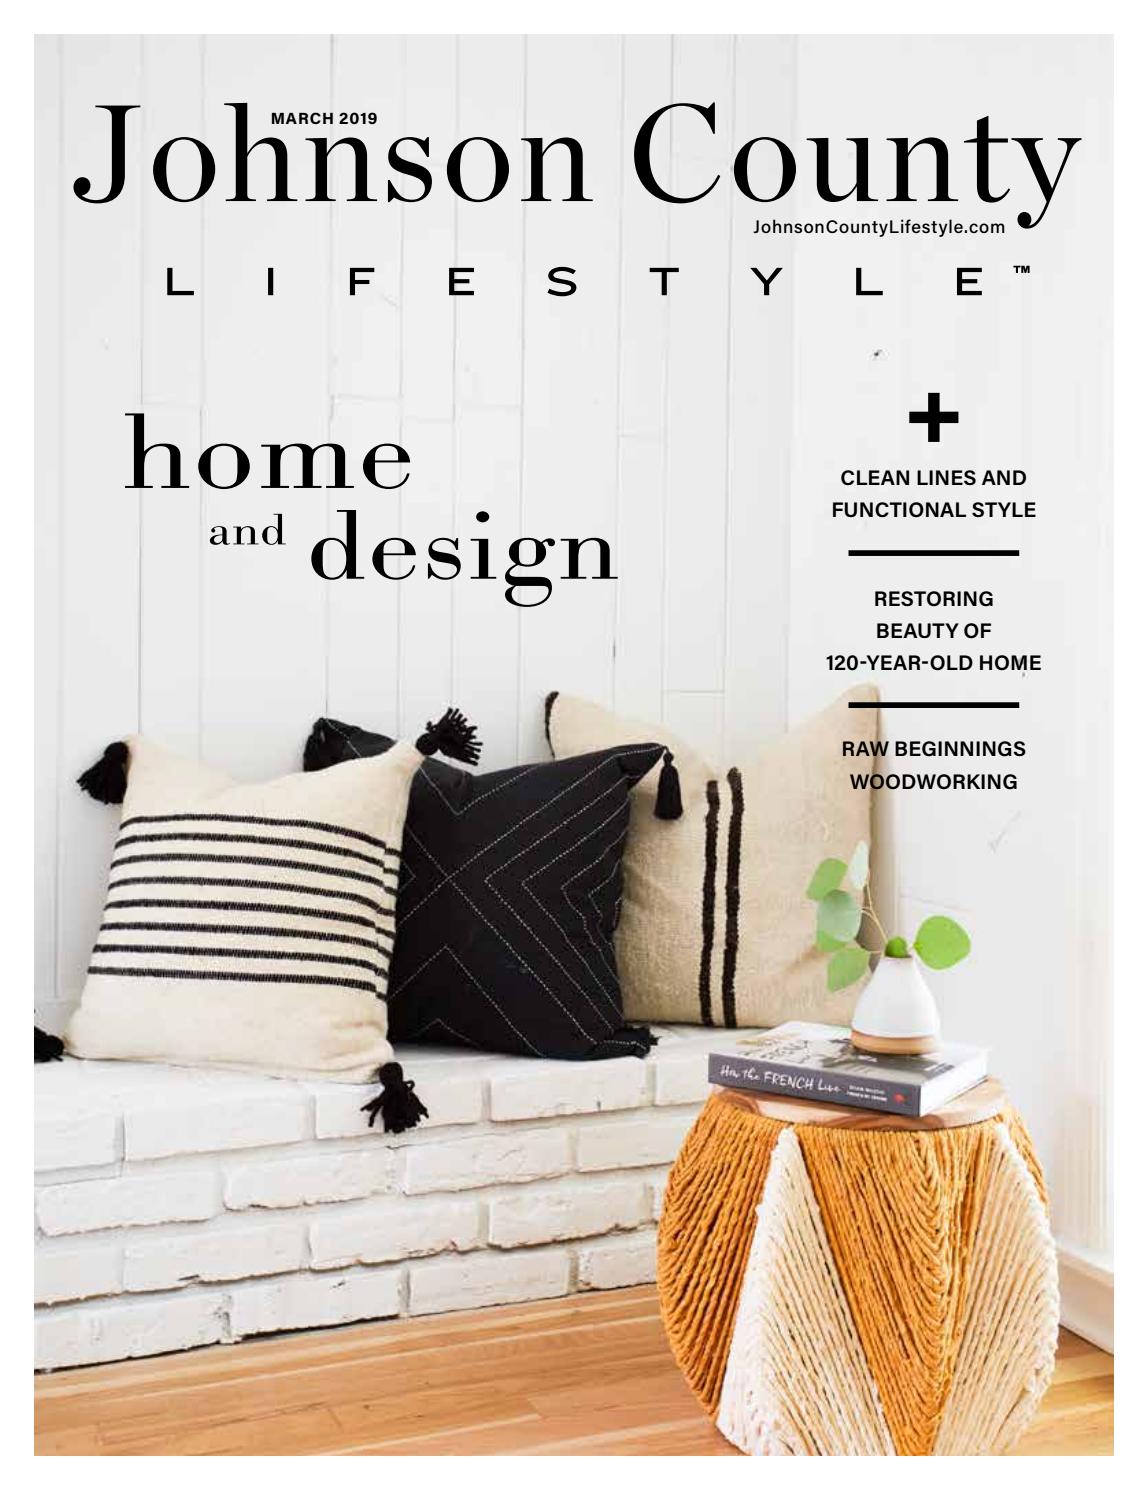 Fireplace Store Overland Park New Johnson County Ks March 2019 by Lifestyle Publications issuu